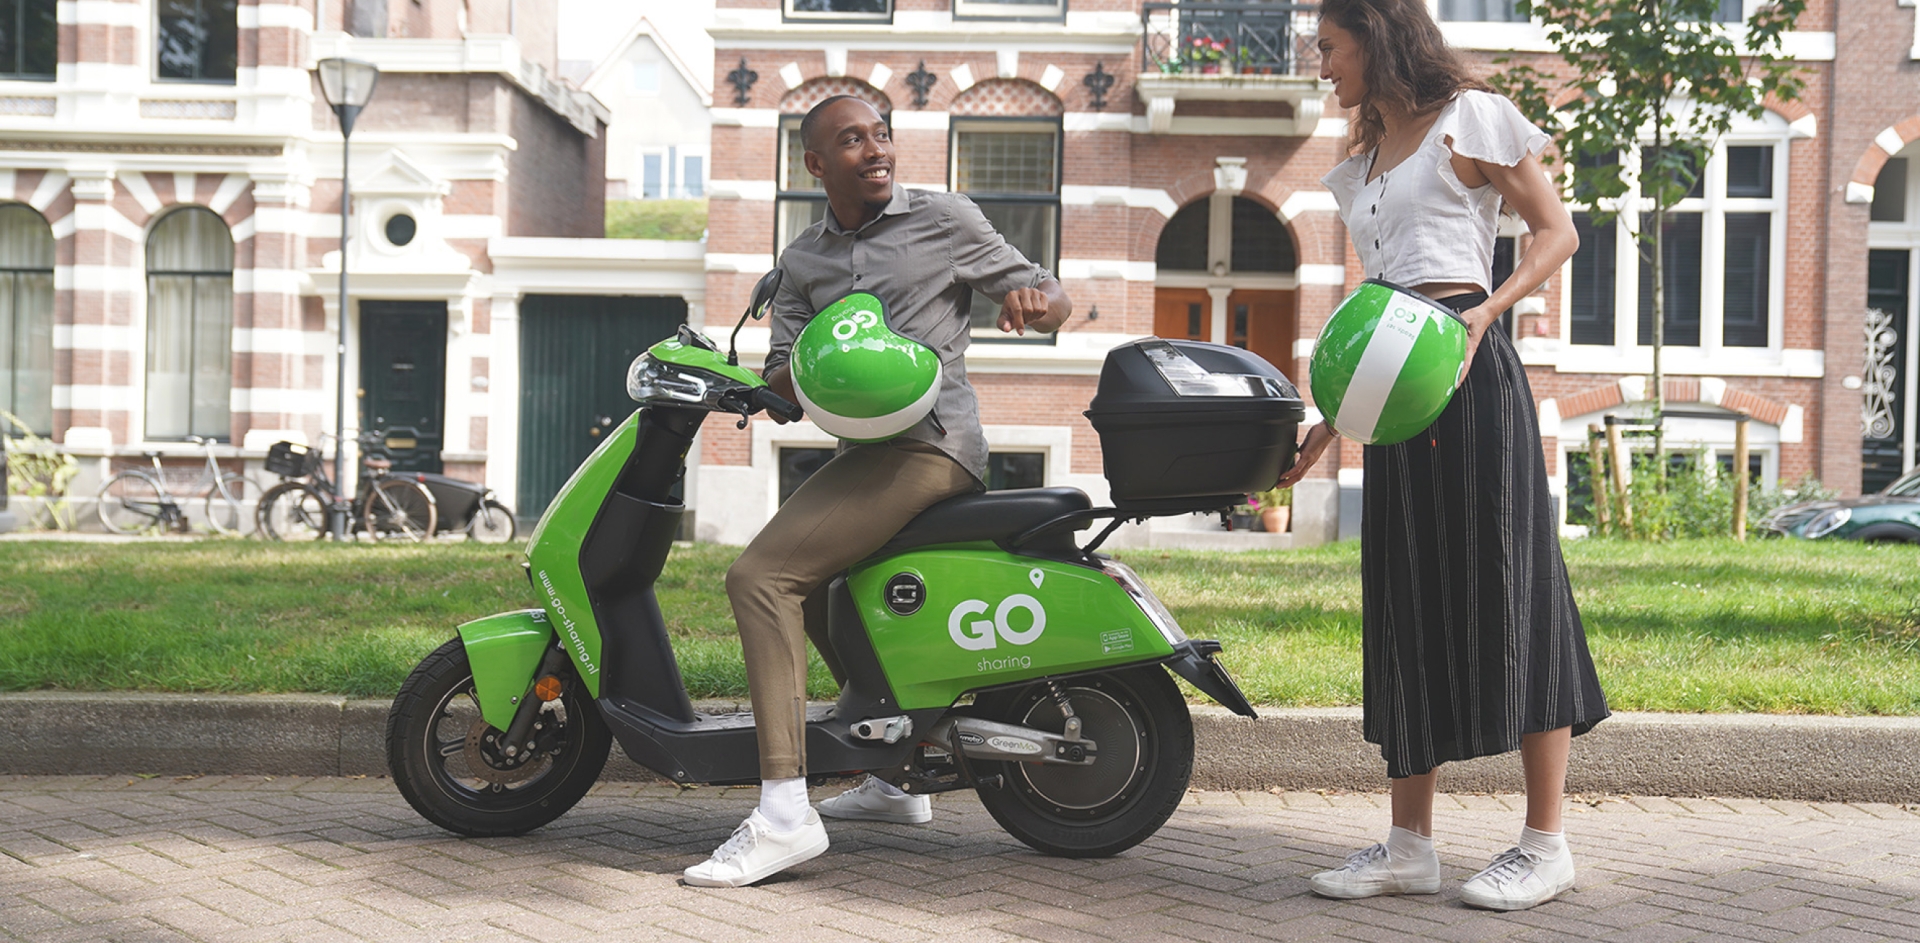 A man sitting on a parked GO Sharing scooter. He is looking back to a woman standing behind the scooter. Both are holding a GO Sharing helmet.